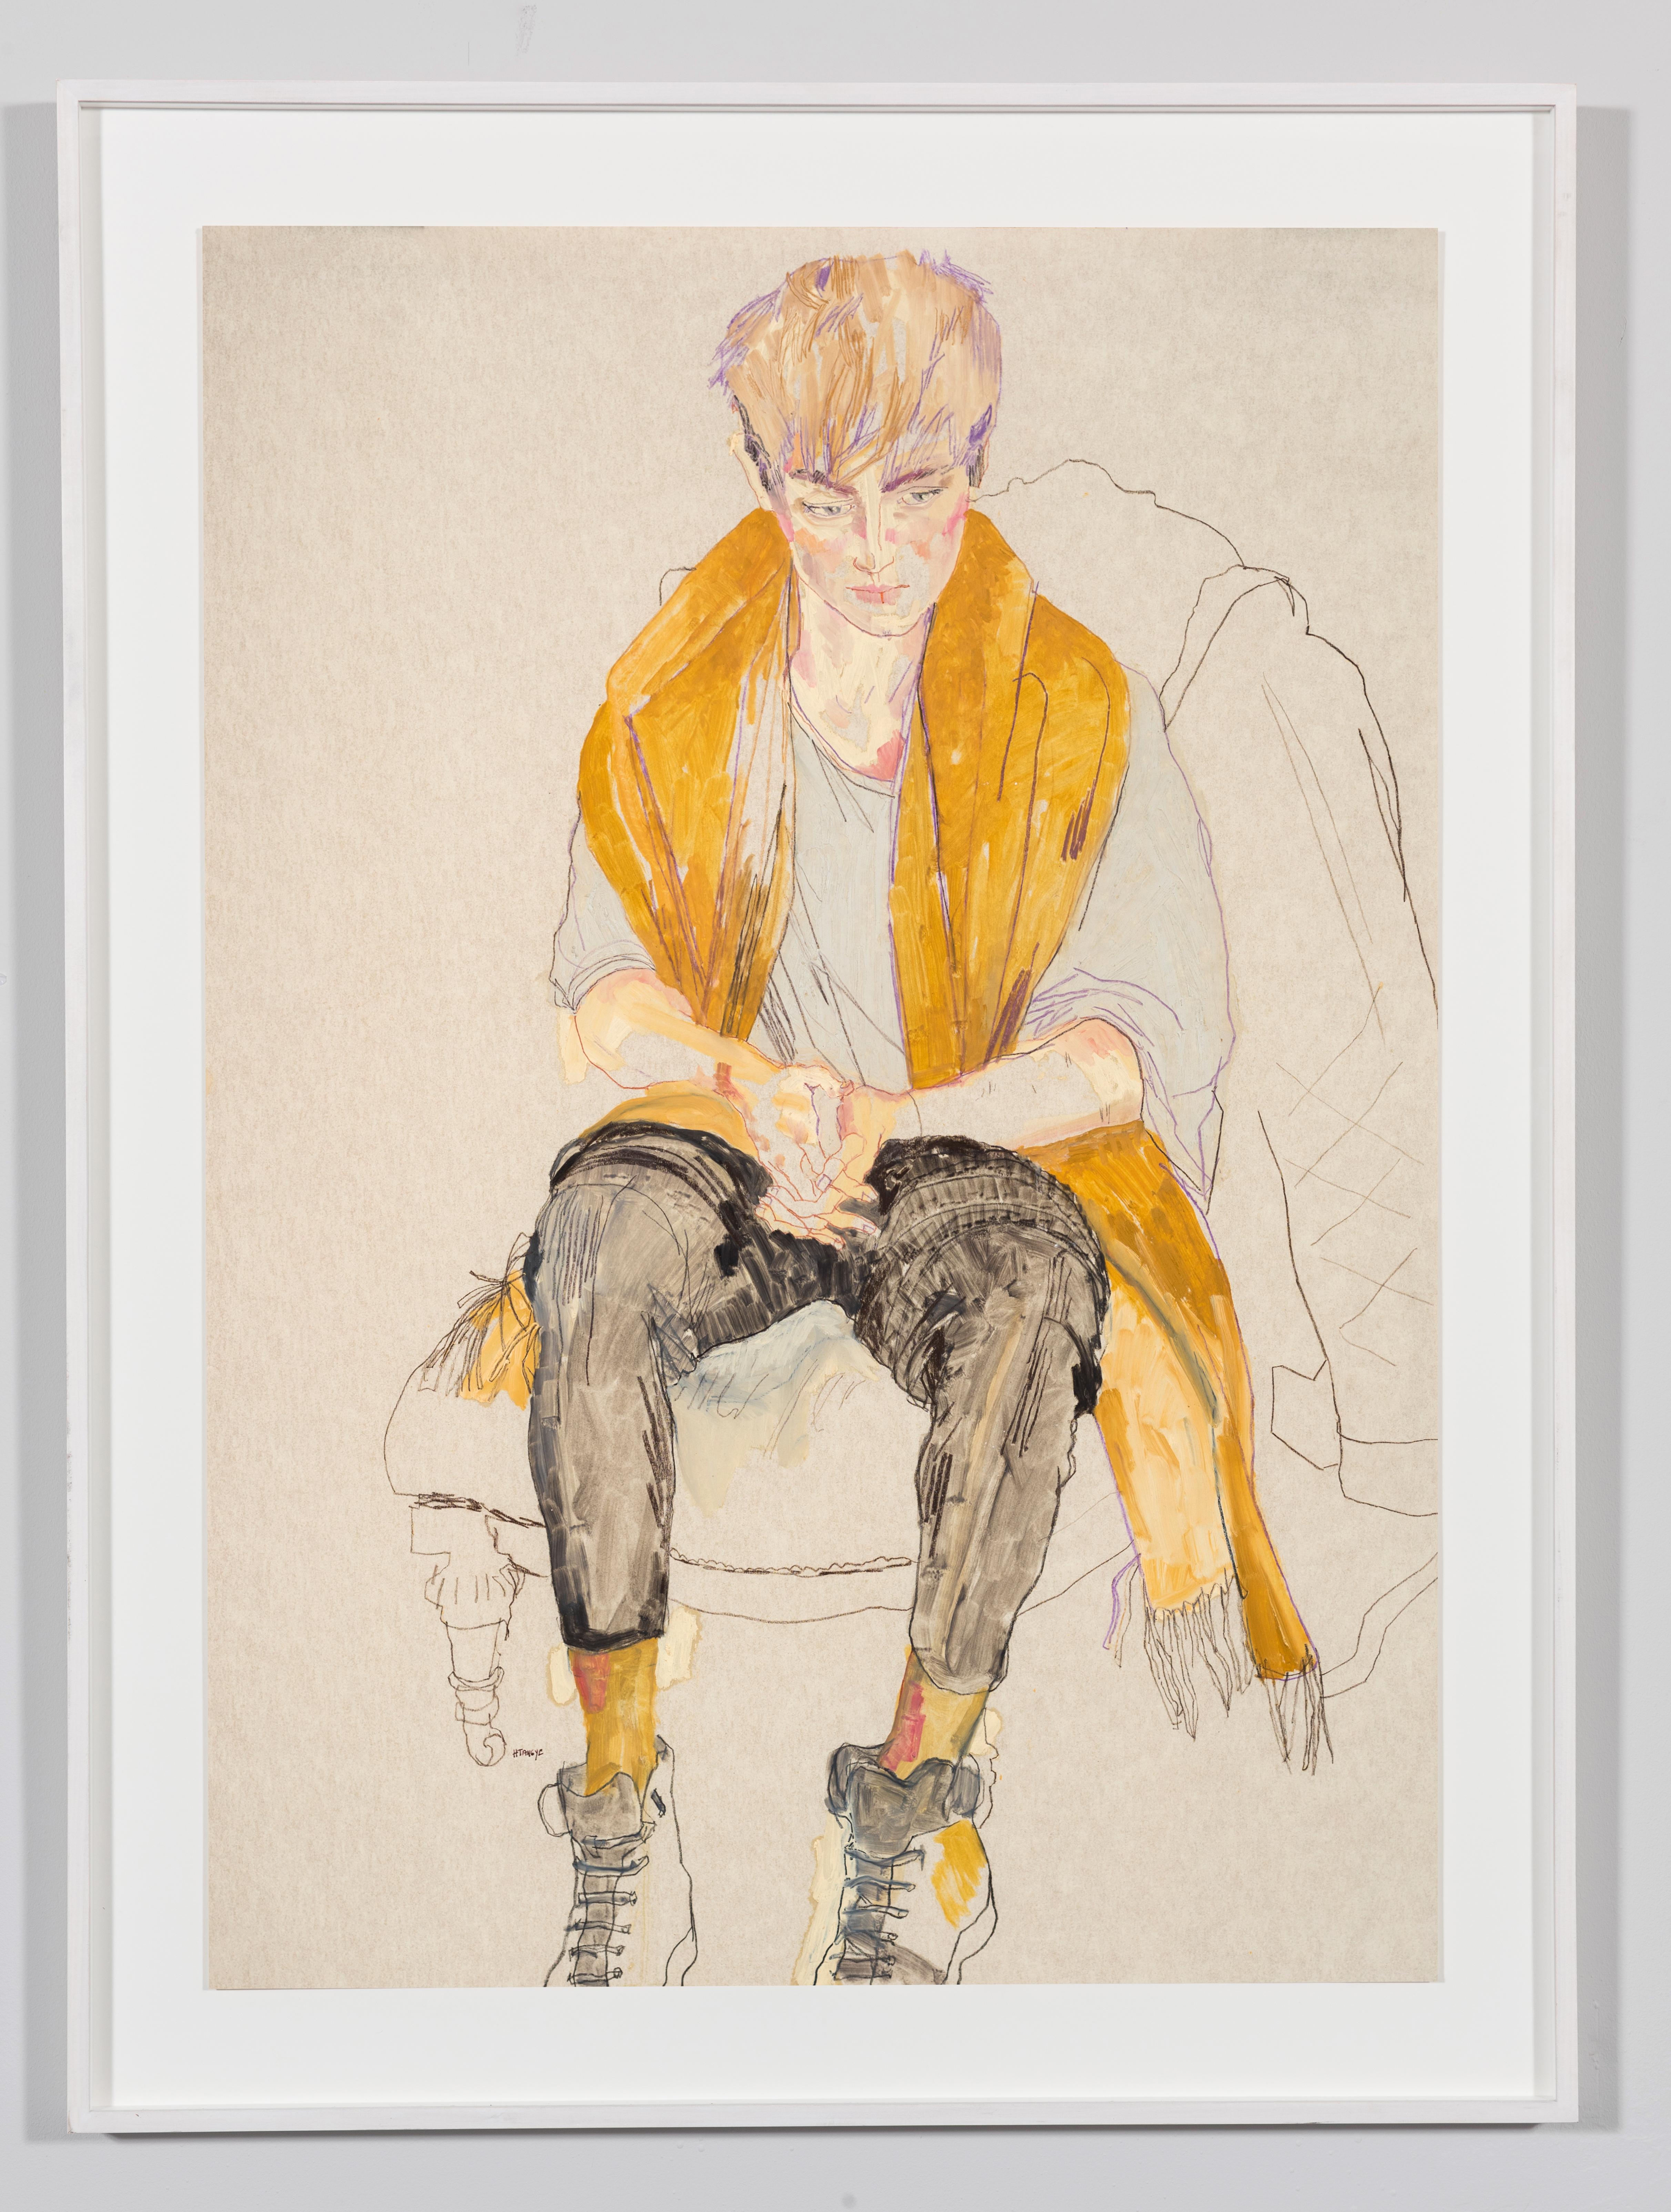 Adam M. (Yellow Scarf), Mixed media on Pergamenata parchment - Painting by Howard Tangye